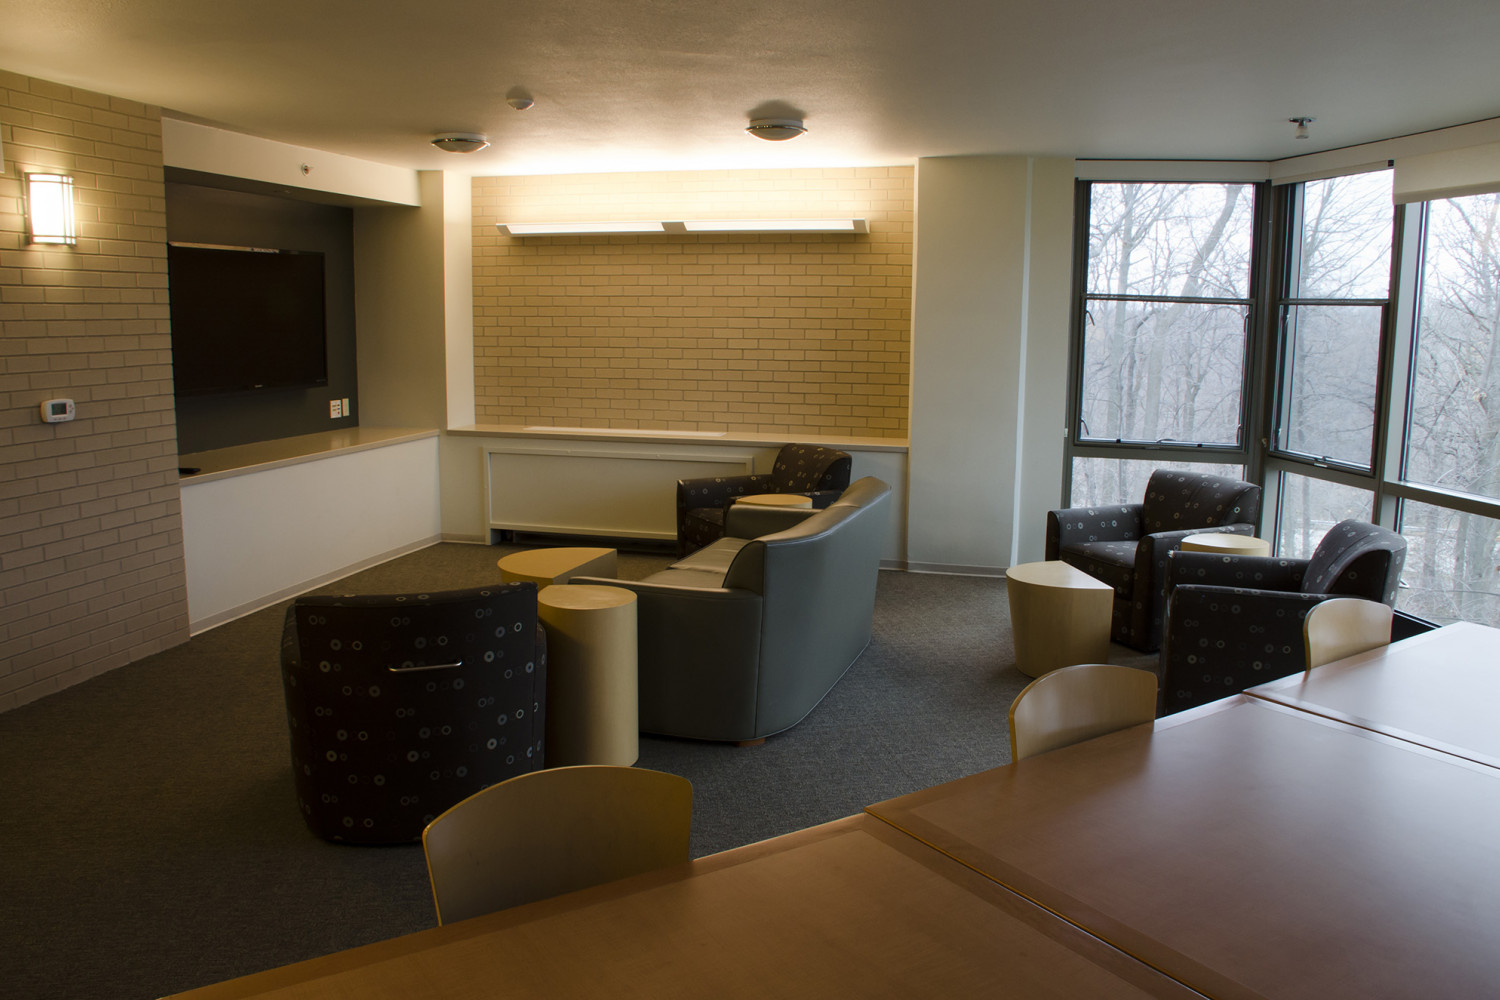 The Oaks offer communal lounge spaces located on each floor and dedicated study spaces in the bas...